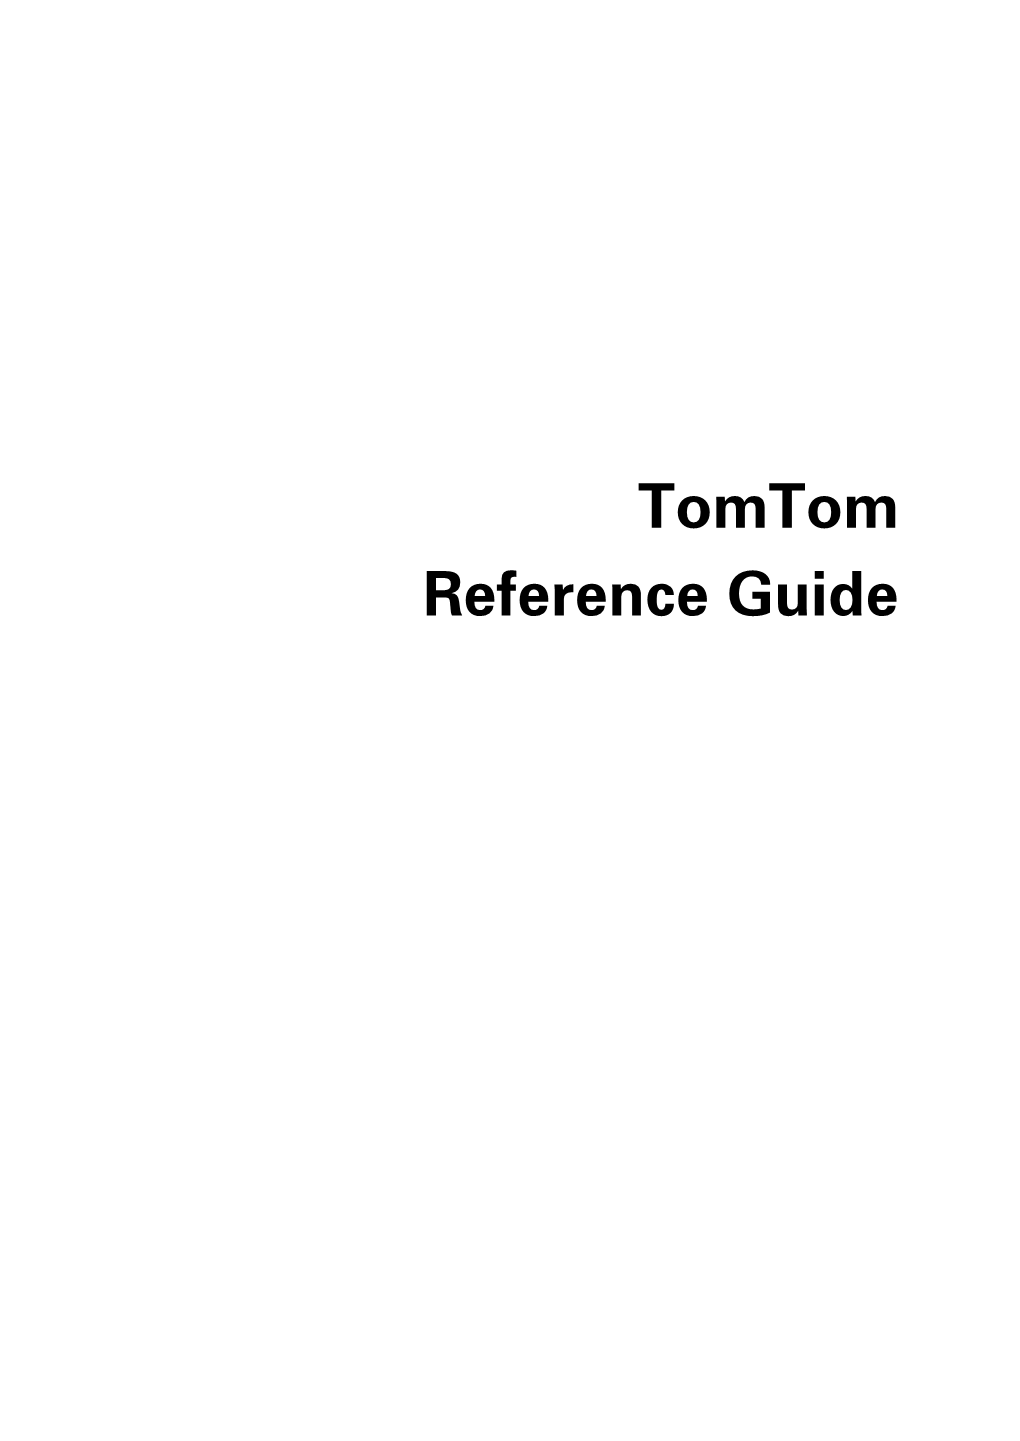 Tomtom Reference Guide